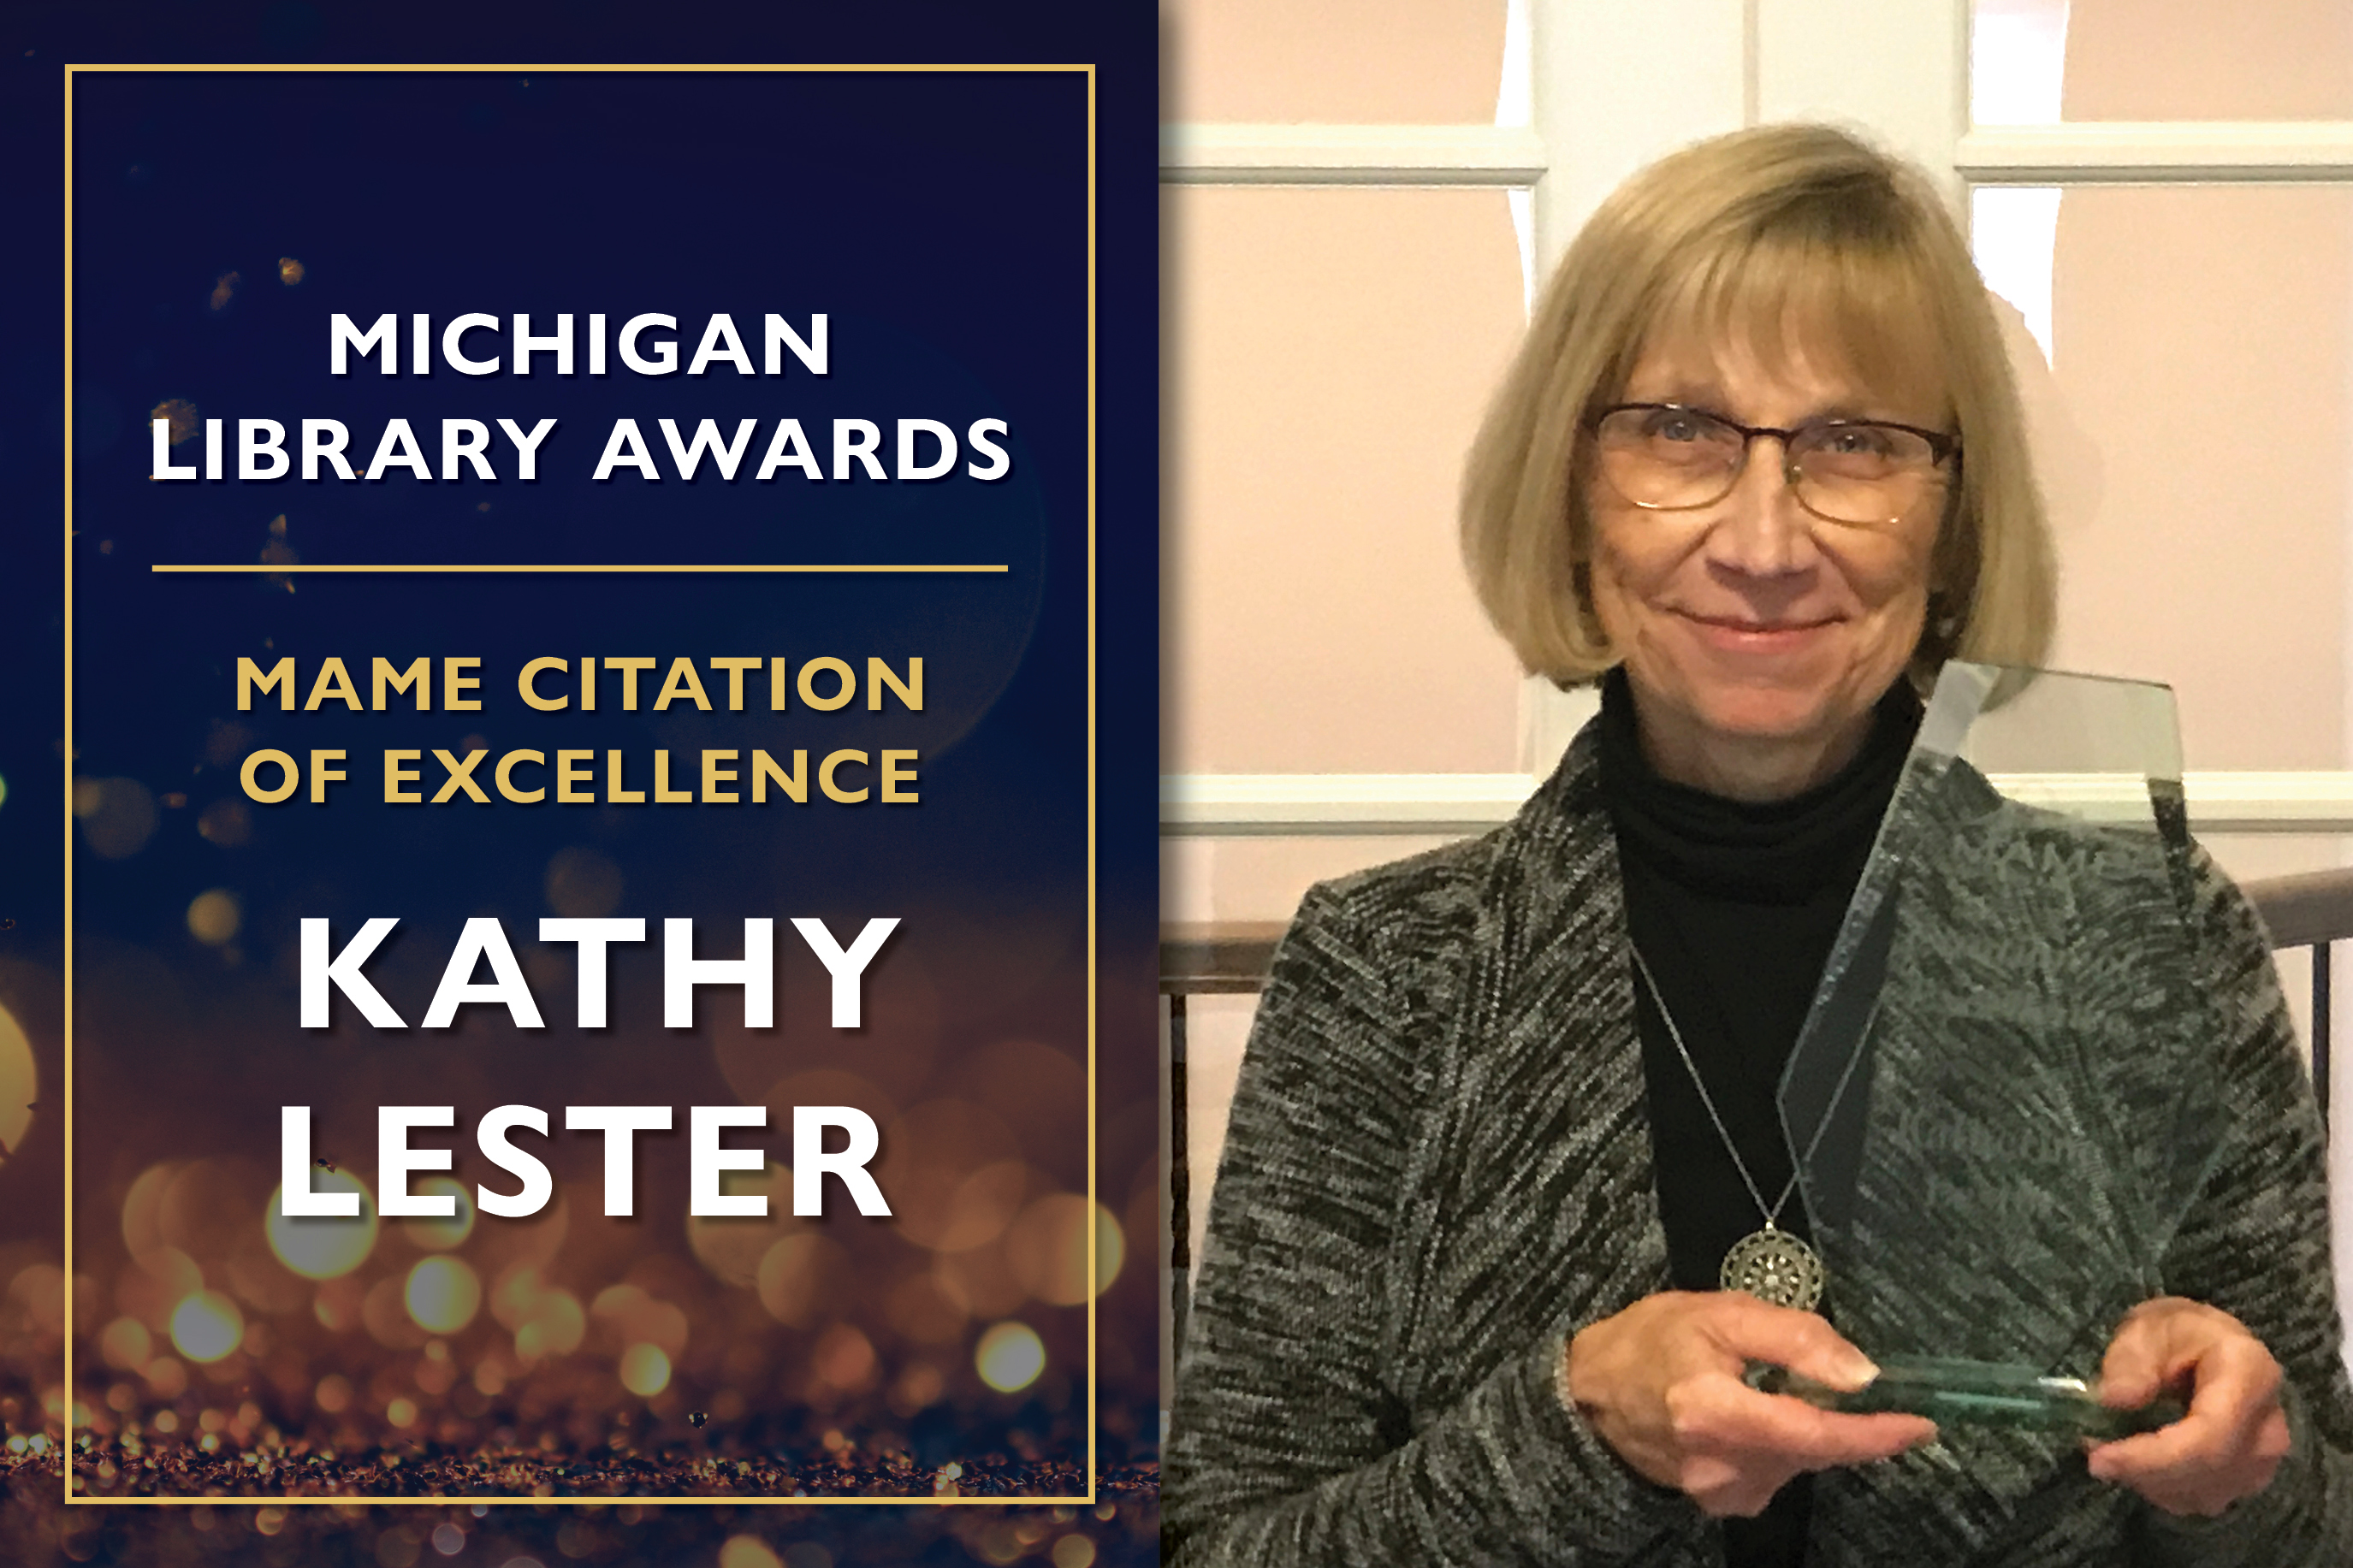 Citation of Excellence  Kathy Lester, Advocacy Chair of the Michigan Association of Media in Education